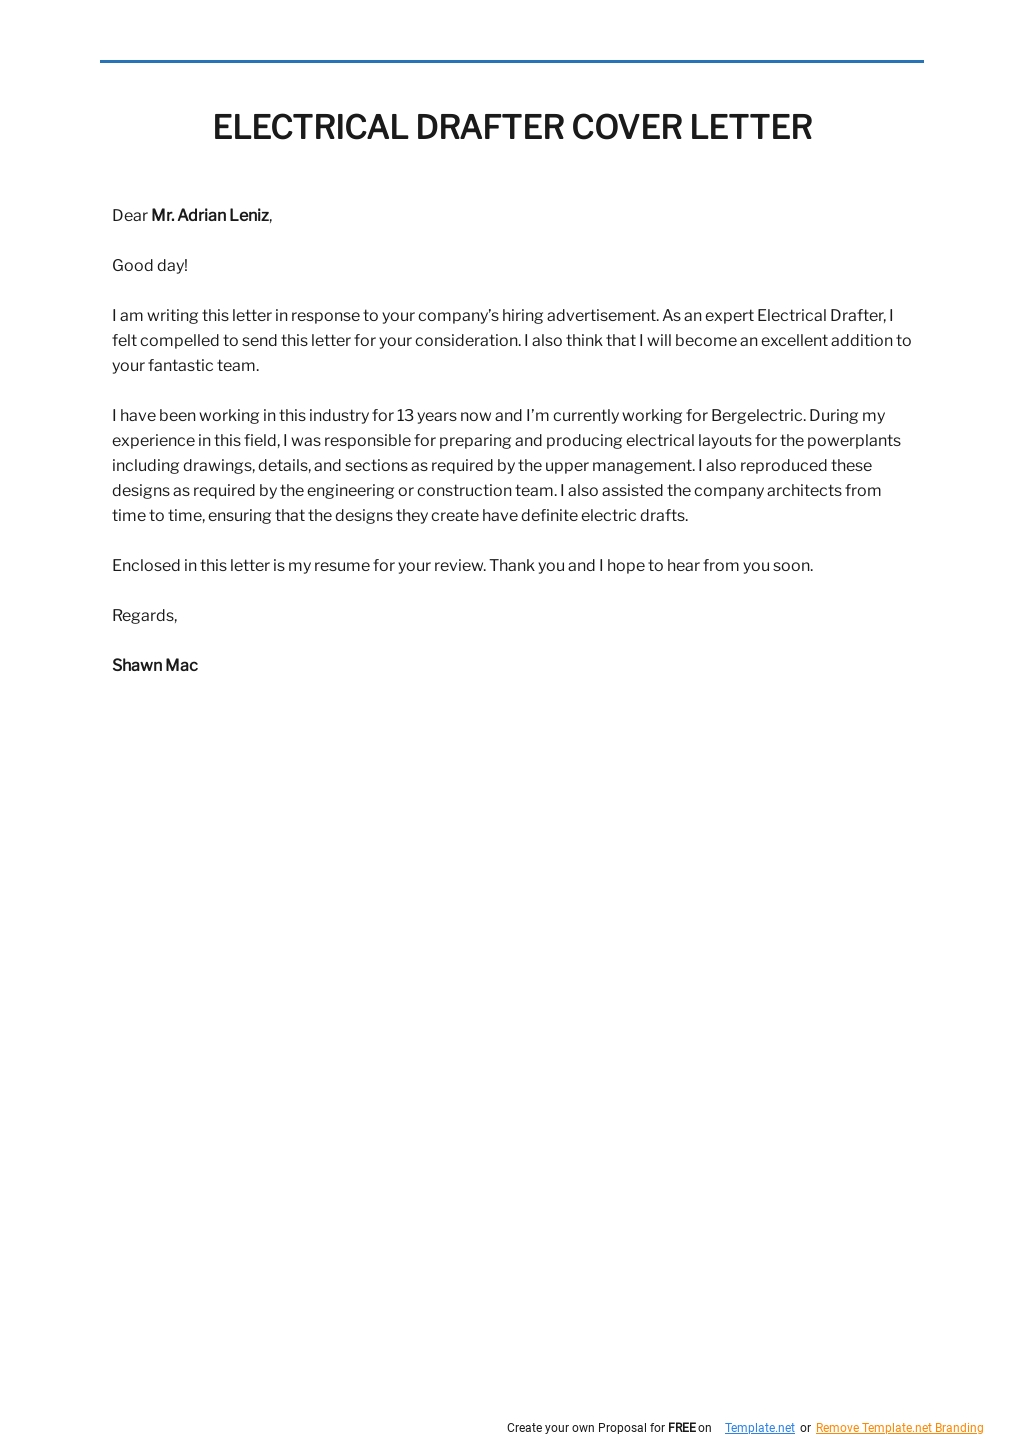 Free Electrical Drafter Cover Letter Template.jpe